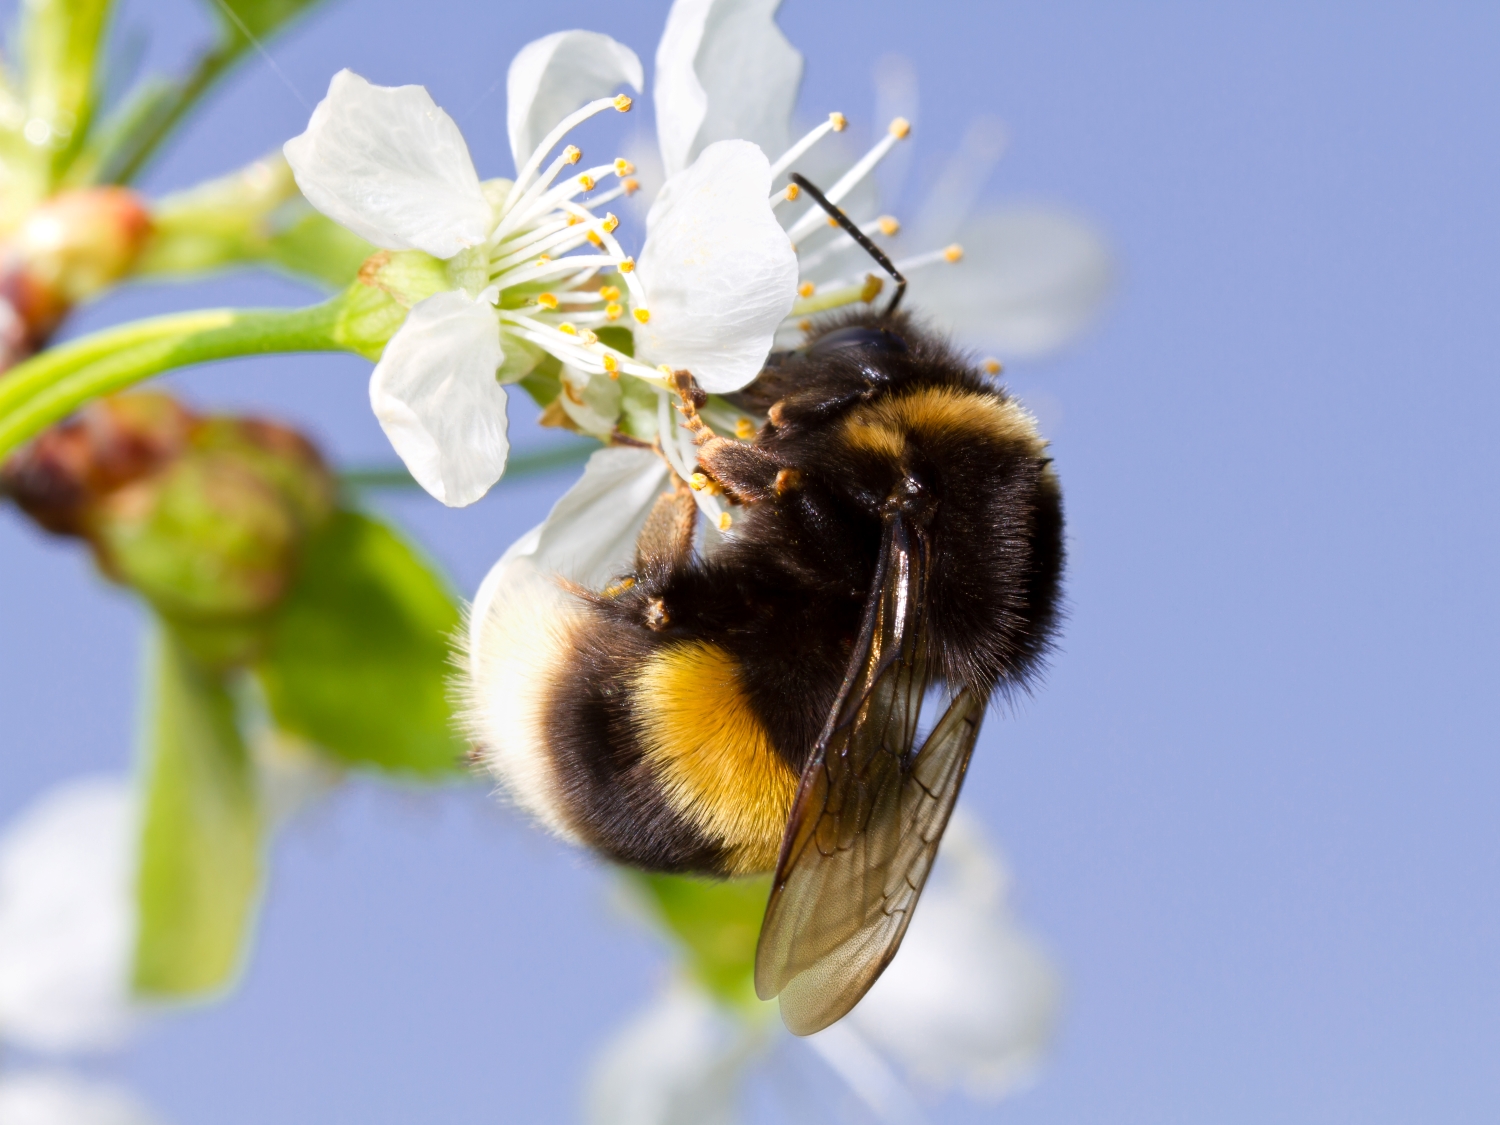 bumble bee, bluebells, squires garden centres, squires garden centre, spring, put a spring in your step, whats on, free things to do, freemium entertainment, guide to, guide to surrey, whats on, guide to whats on, outdoors, fresh air, gardening, gardens, nature, wellbeing, 